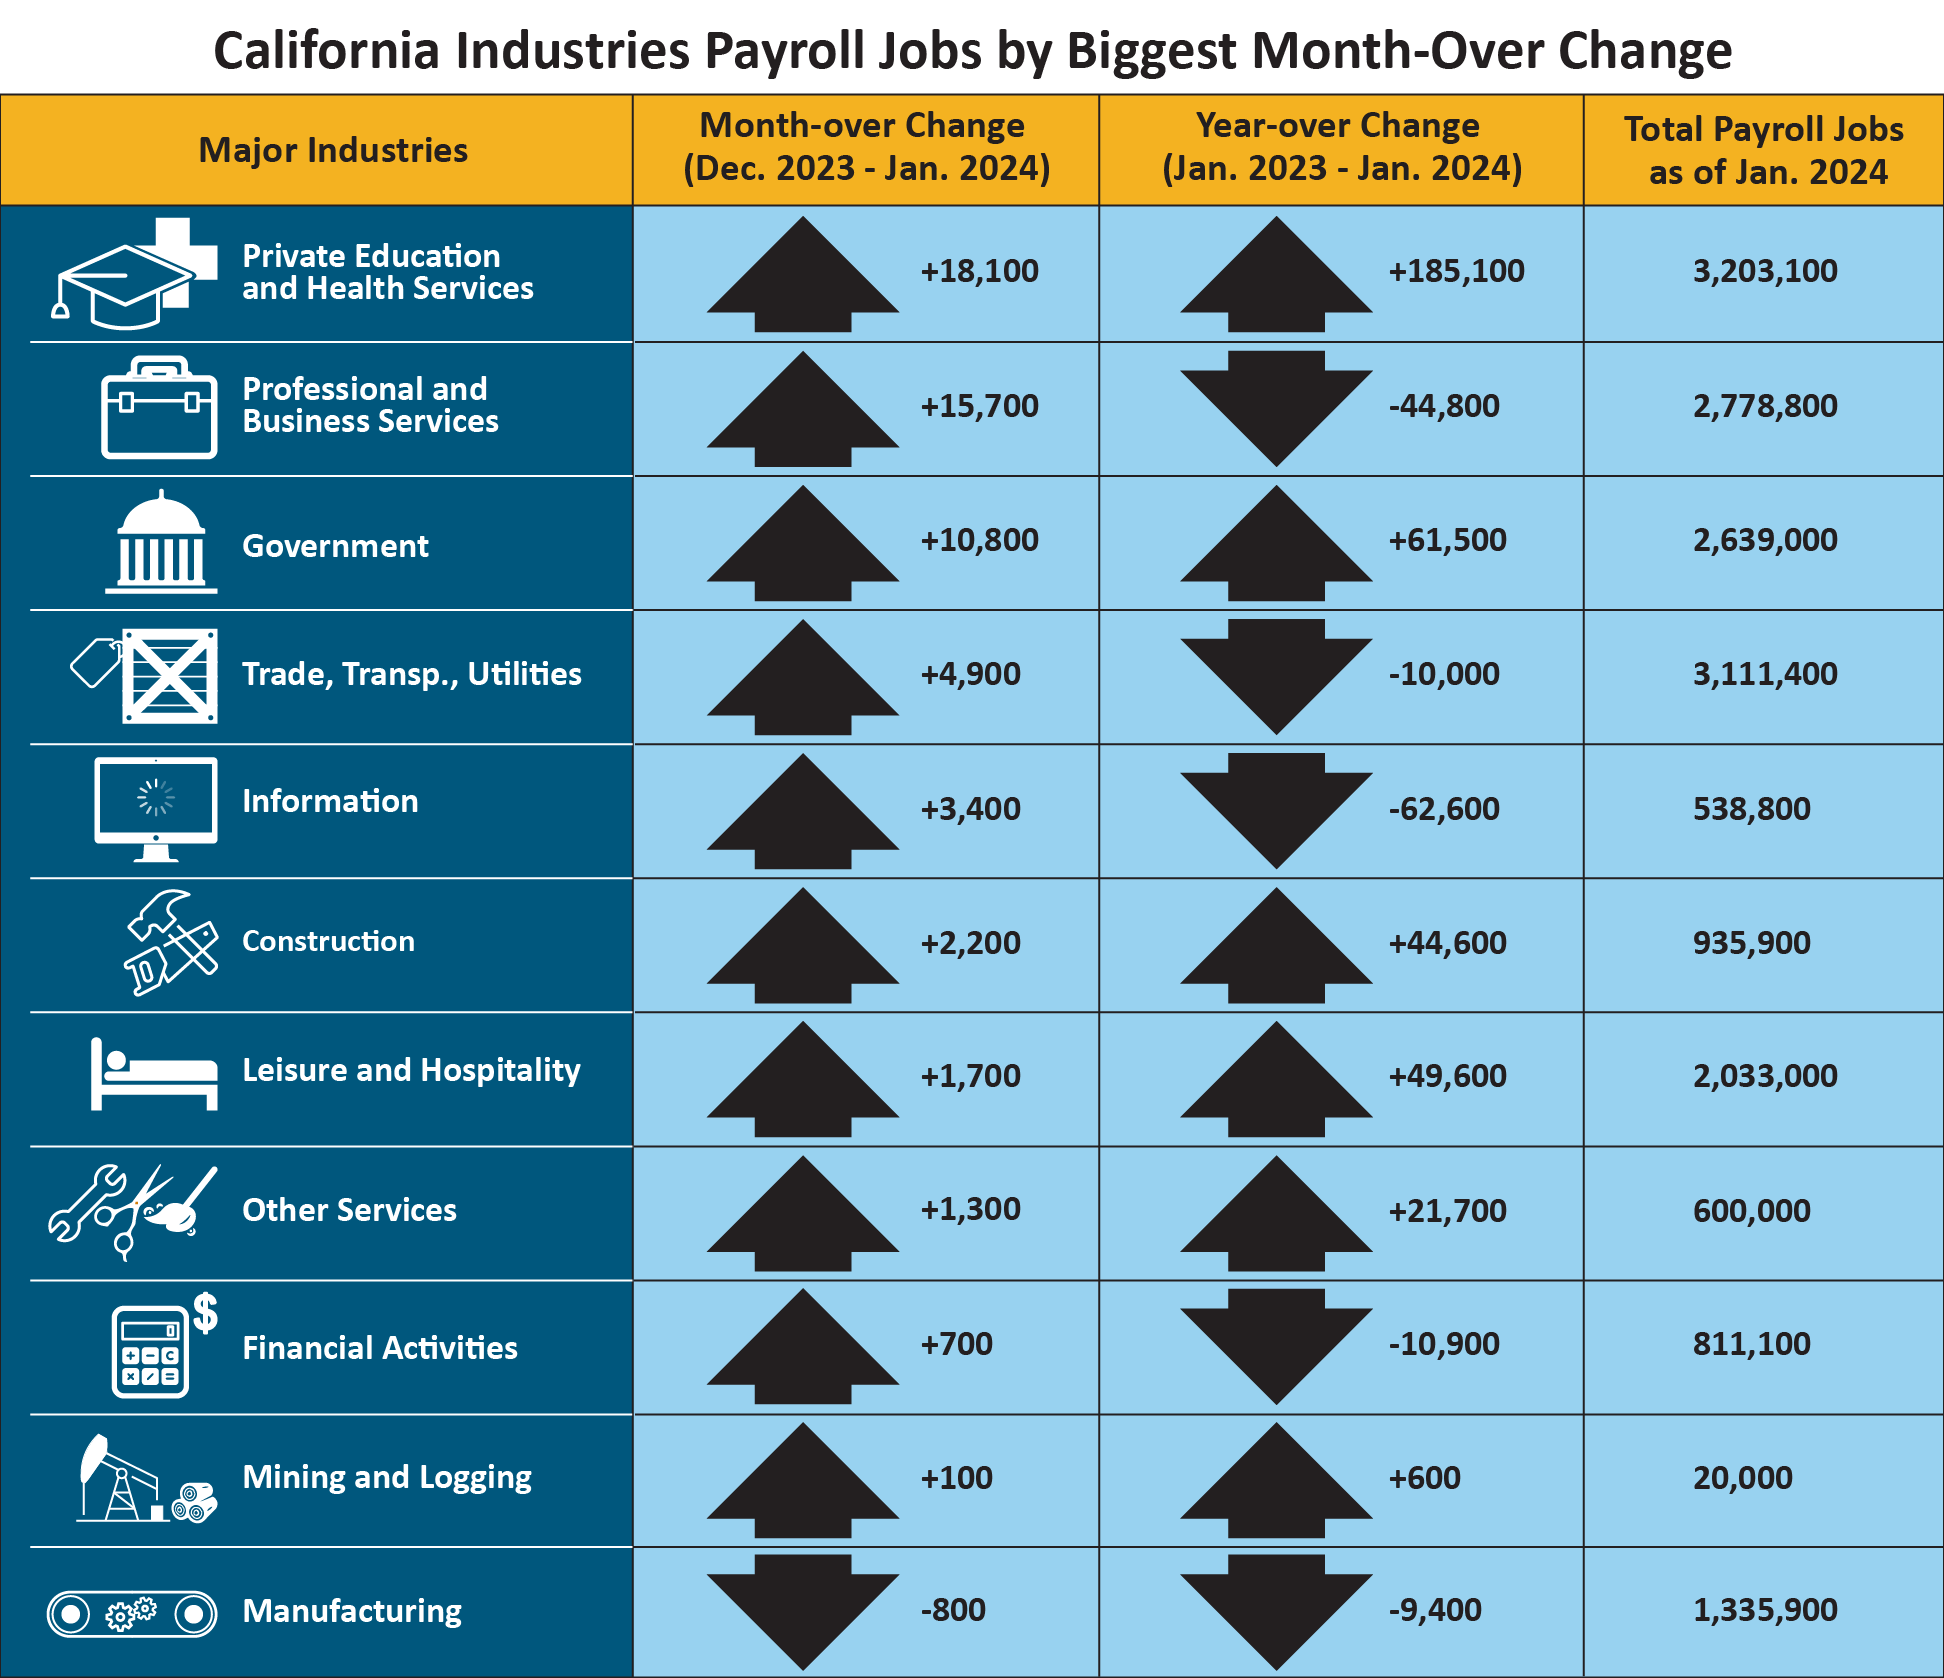 This table shows the number of California nonfarm payroll jobs grouped by major industries, with columns showing month-over and year-over change, plus total payroll jobs as of Jan. 2024.  If you need an alternative format to access this information, contact the EDD Equal Employment Opportunity Office at EEOmail@edd.ca.gov or call toll free 1-866-490-8879.